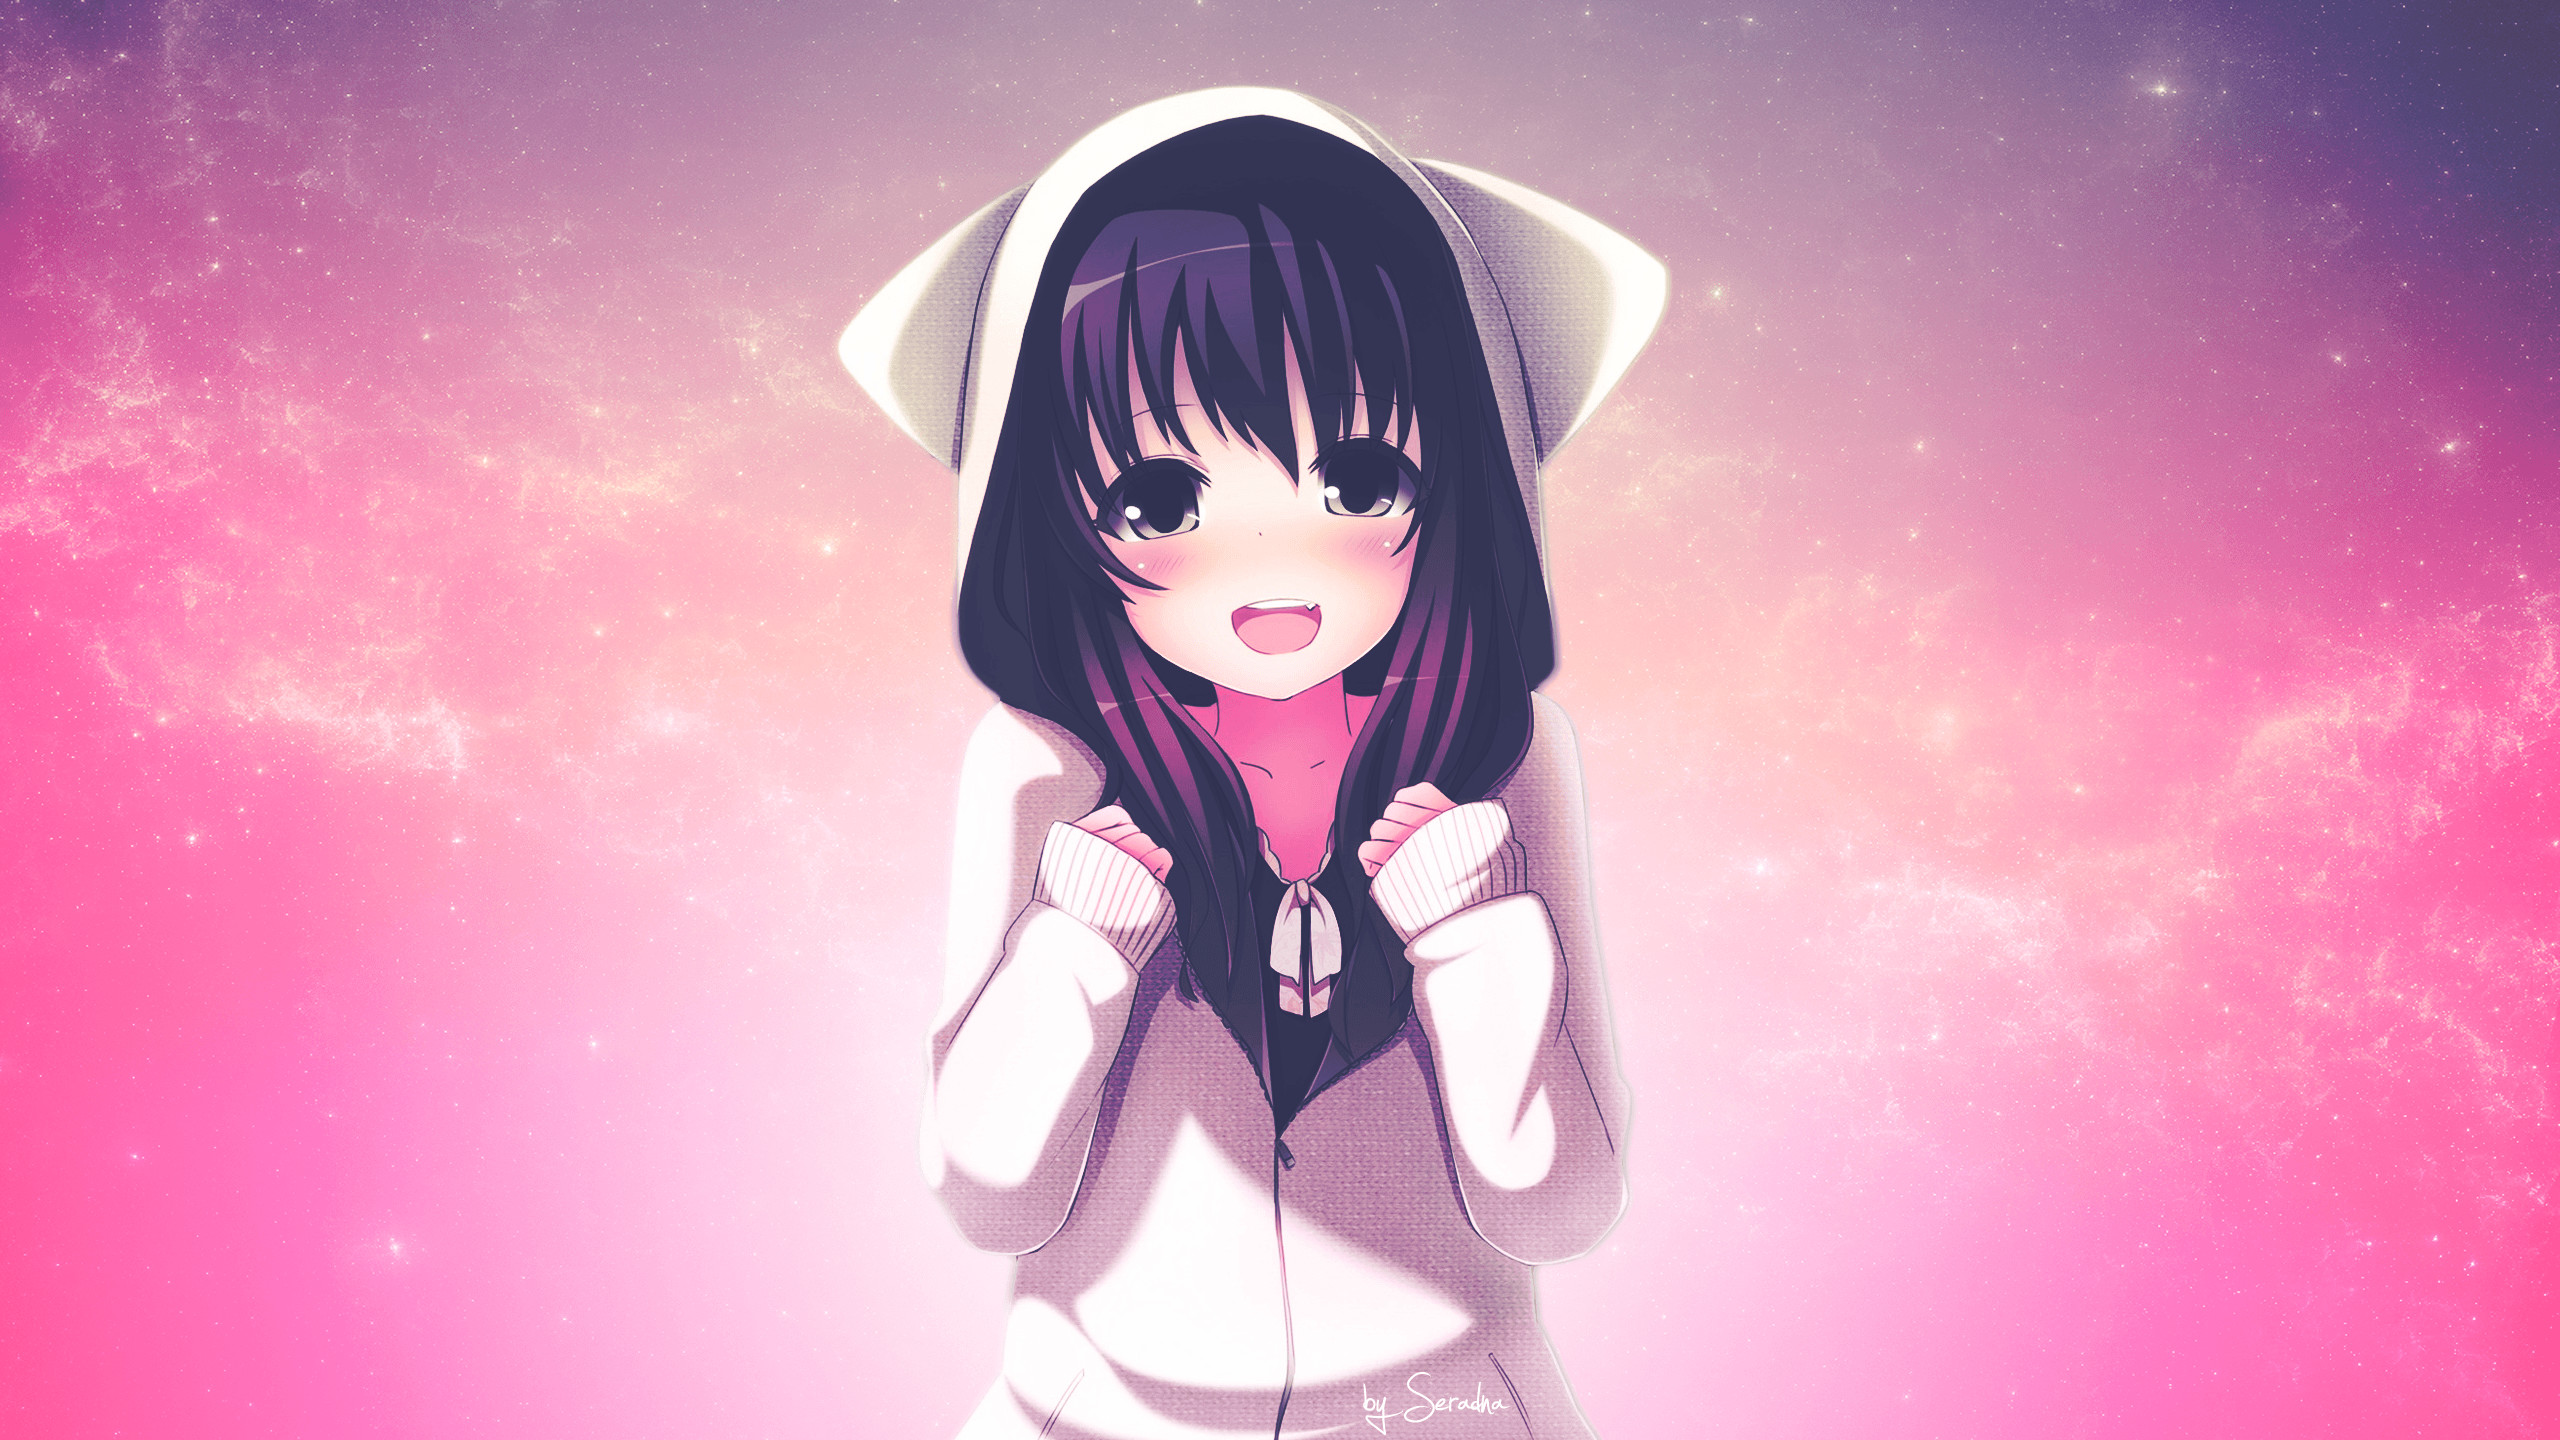 2560x1440  Anime Cute Anime Girl wallpapers (Desktop, Phone, Tablet) -  Awesome .